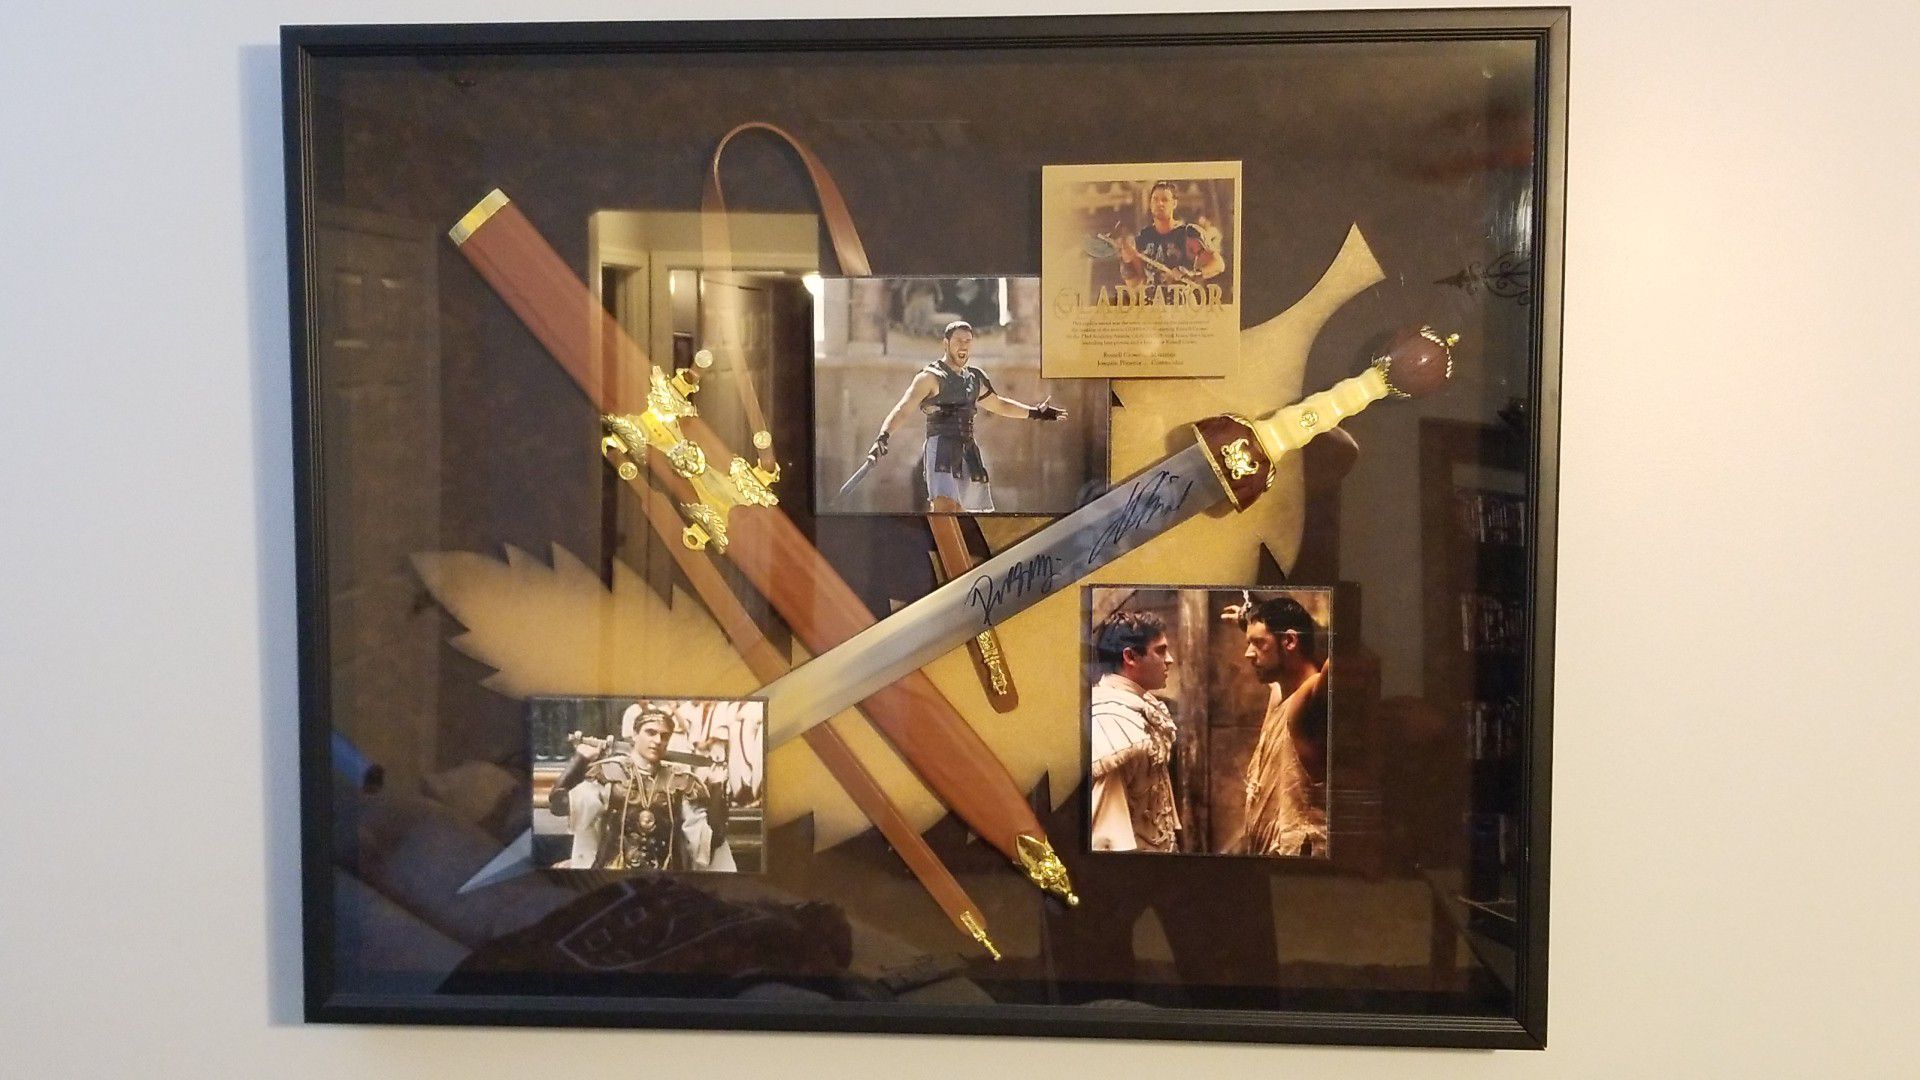 Autographed sword and display case from the movie Gladiator starring Russell Crowe and Joaquin Phoenix